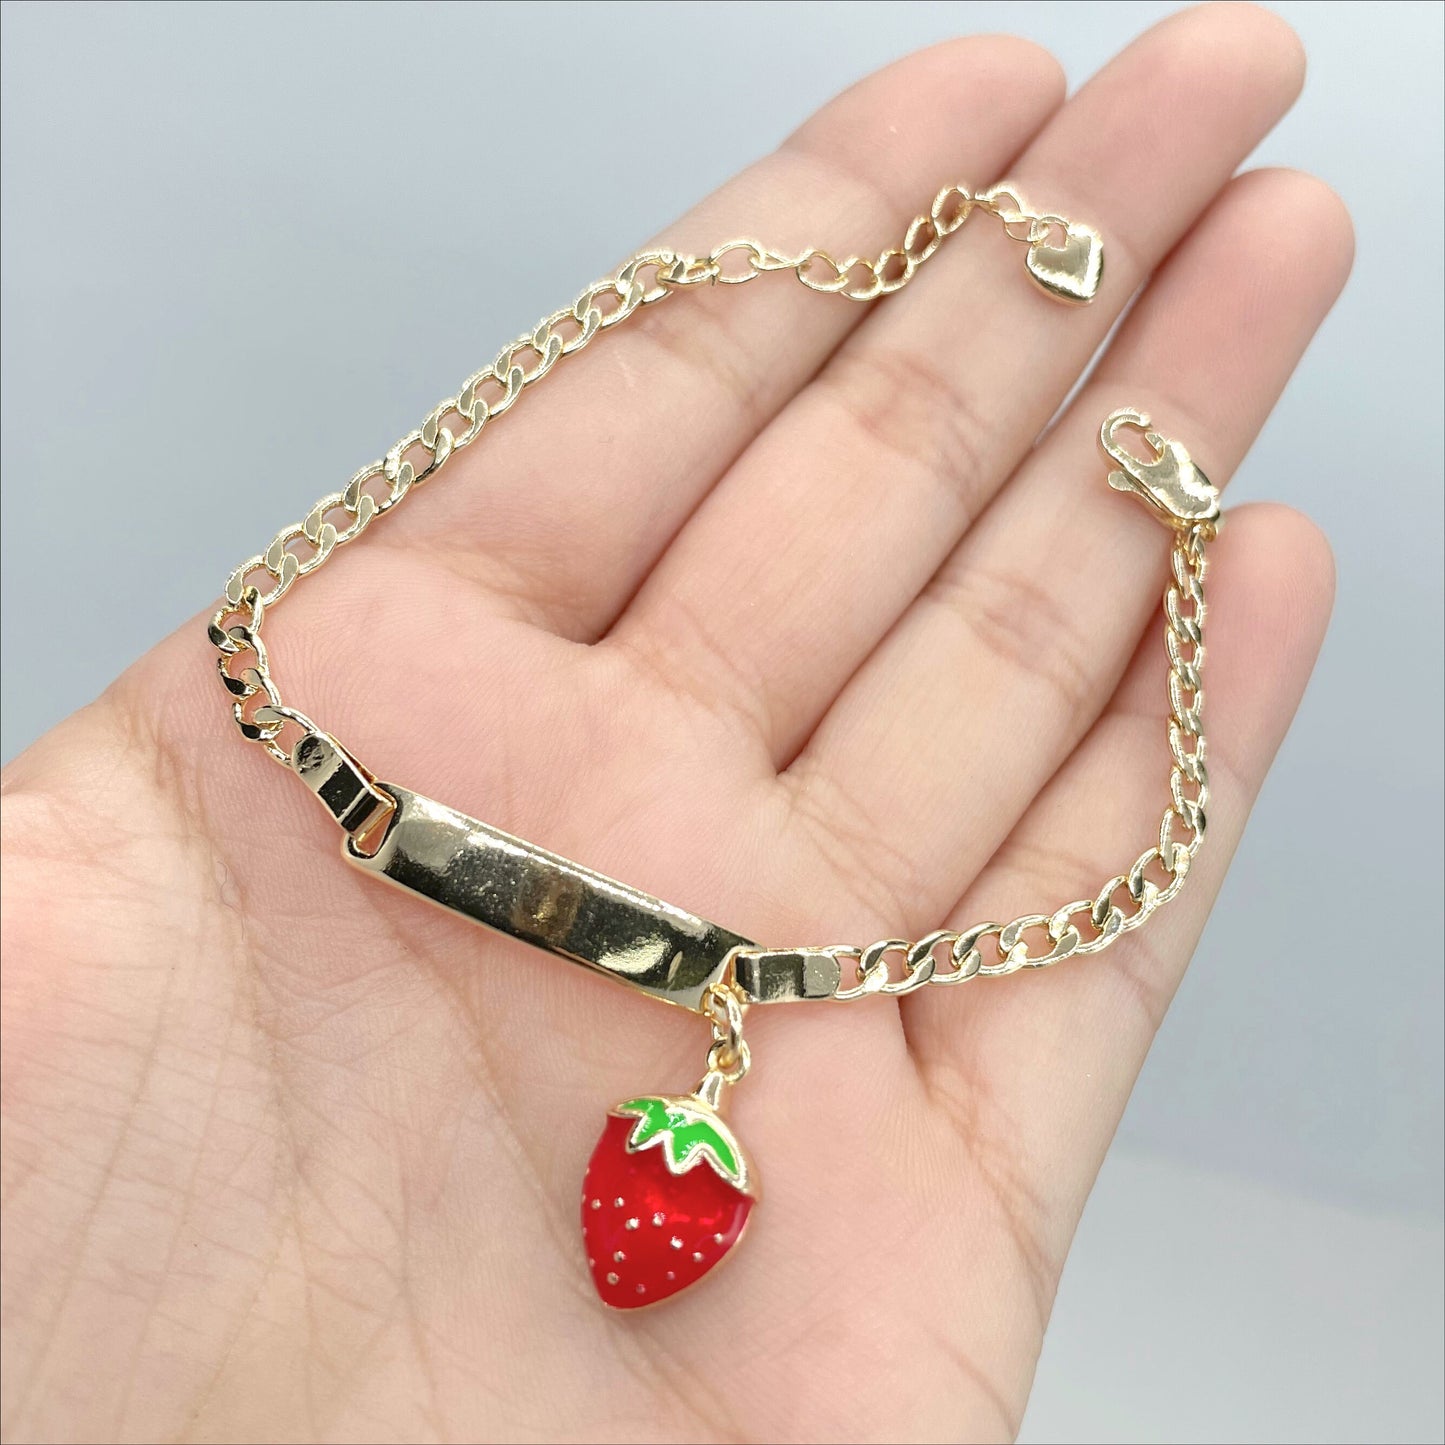 18k Gold Filled Cuban Link Chain with Colored Enamel Strawberry Charm, ID Kids Children Bracelet, Wholesale Jewelry Making Supplies